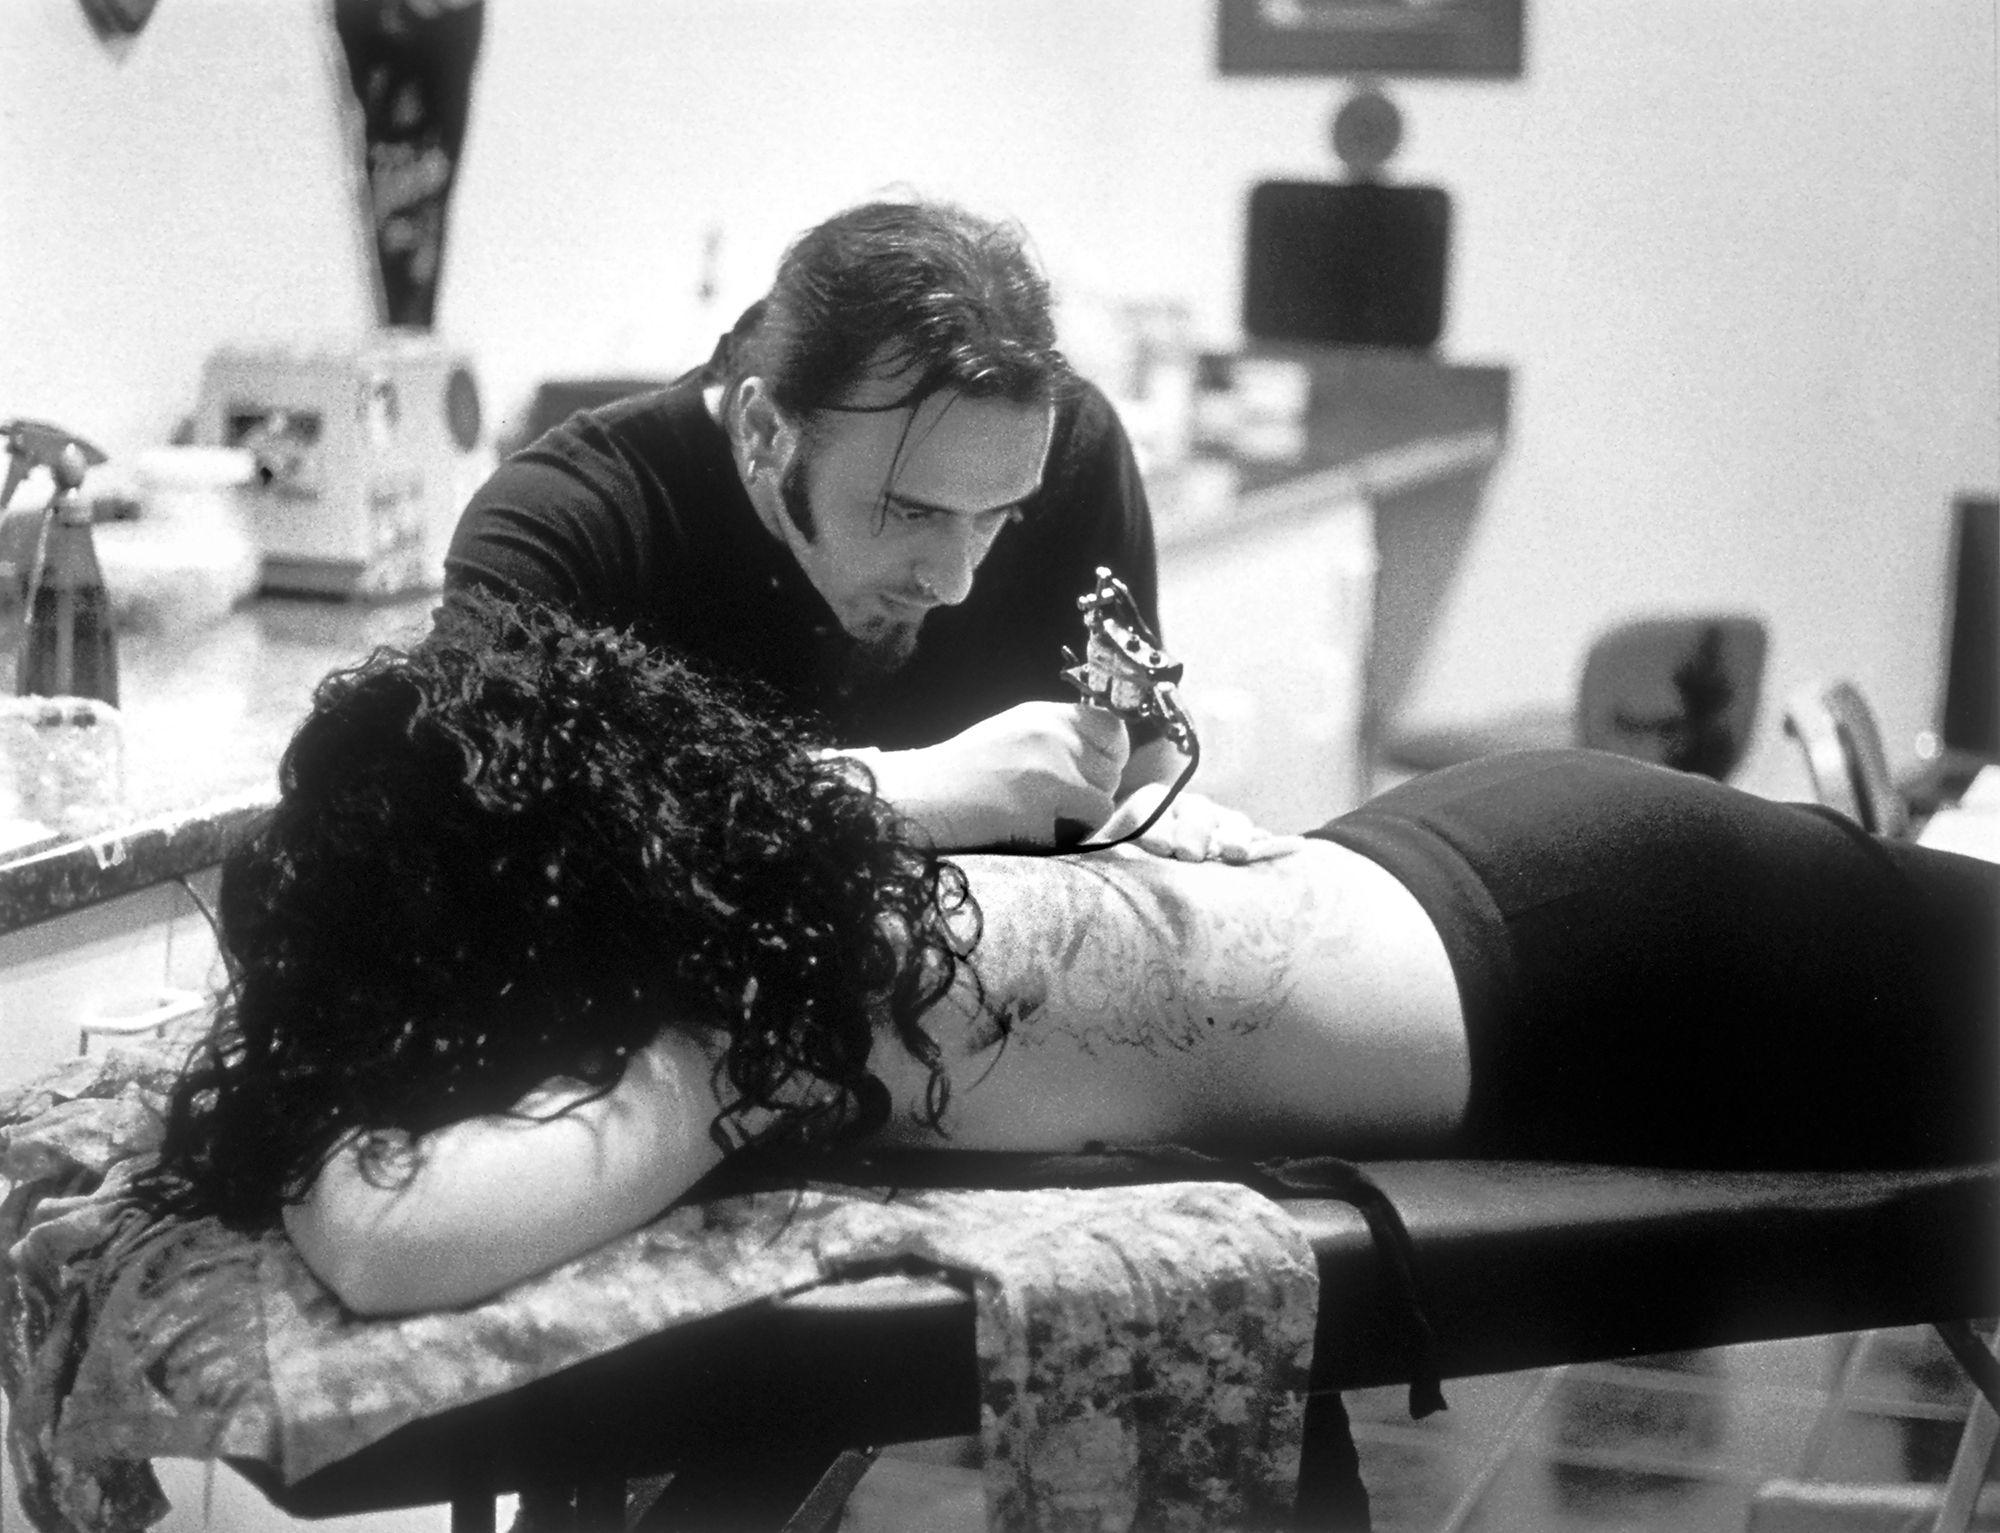 Michael Lange Black and White Photograph - Tattoo, Photograph, Archival Ink Jet